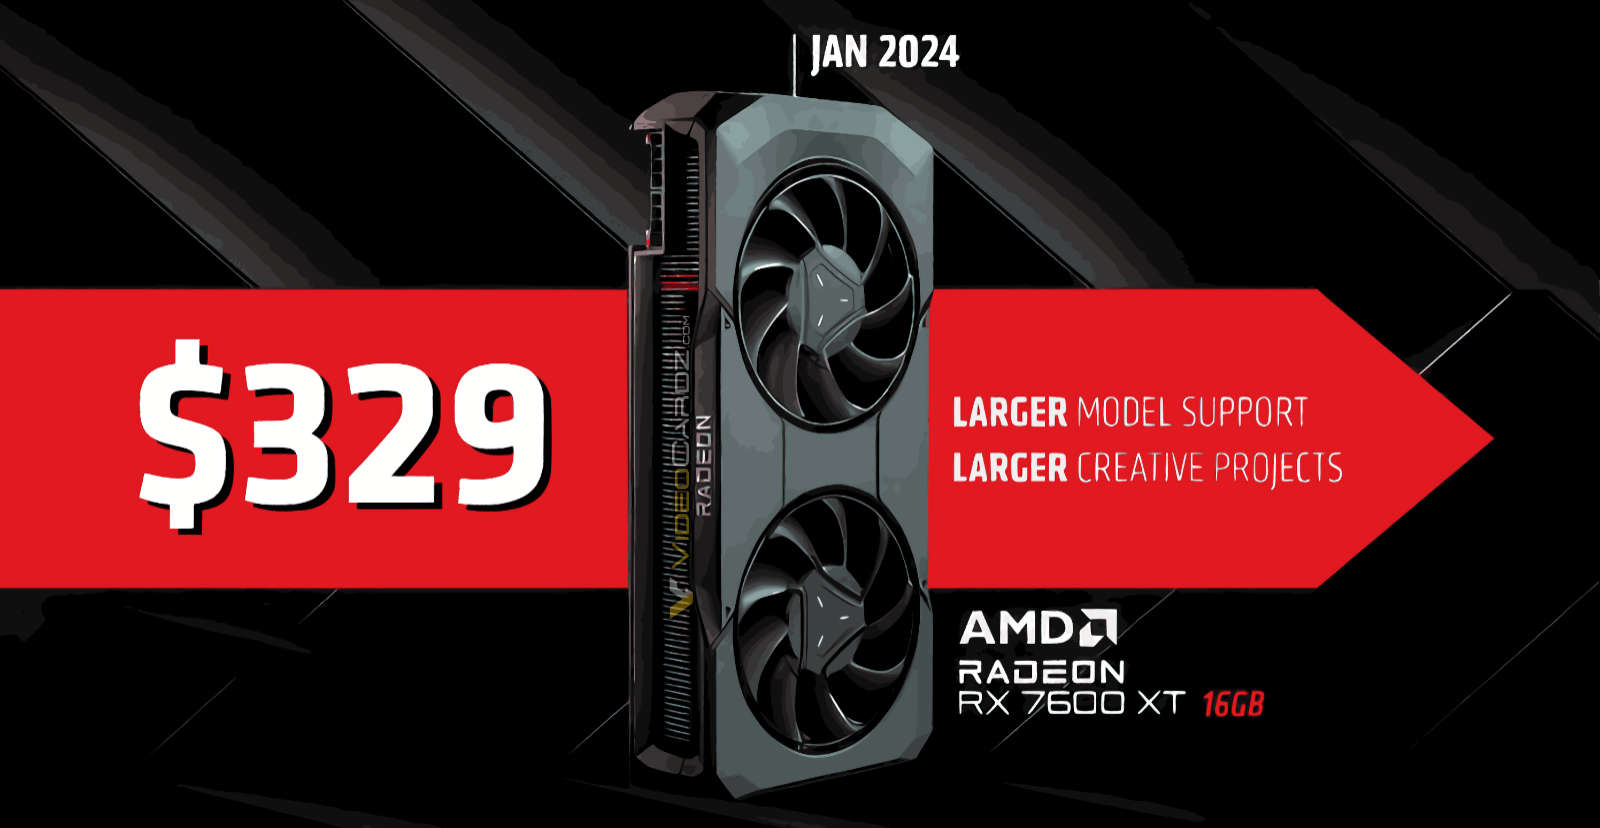 AMD Radeon RX 7600 XT 16GB launches January 24 at $329, same core count as  non-XT model - VideoCardz.com